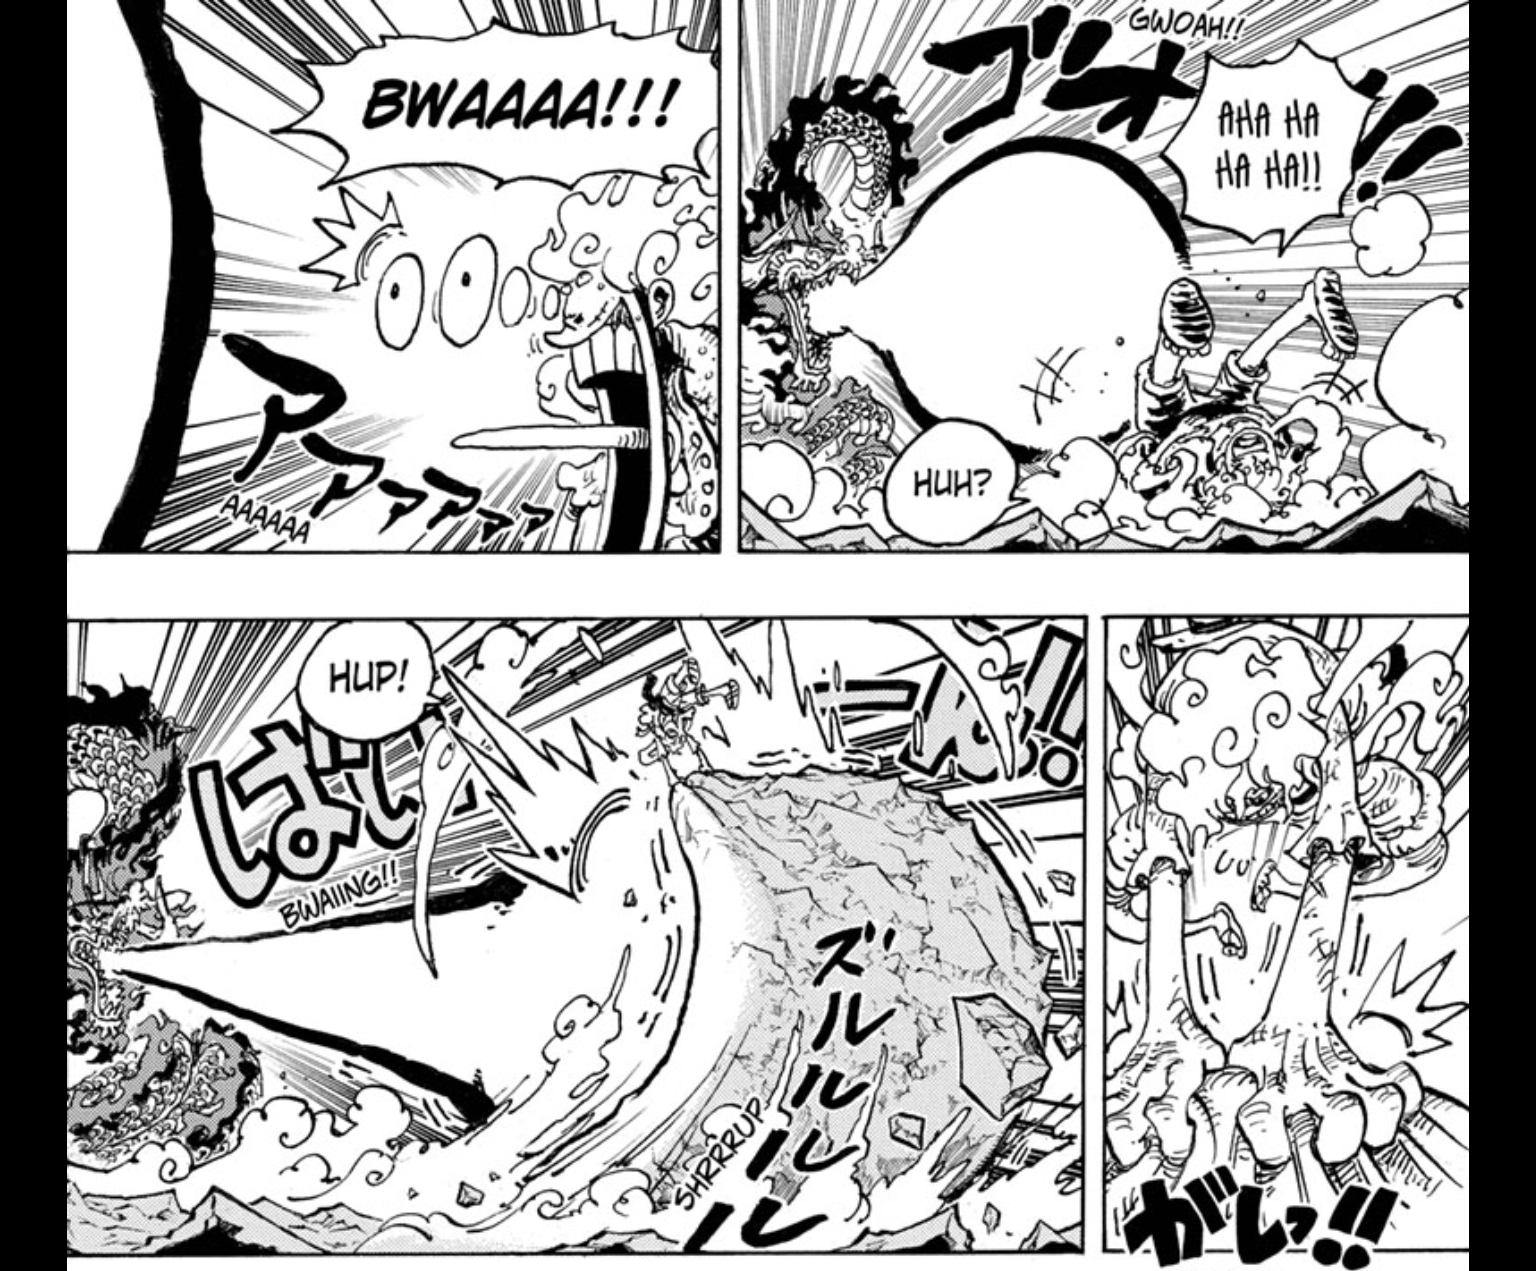 Luffy, in Joyboy mode, reacts with comic surprise to Kaido's breath blast and pulls the ground up to block it in Chapter 1044.  (Image: Eiichiro Oda/SHUEISHA Inc)